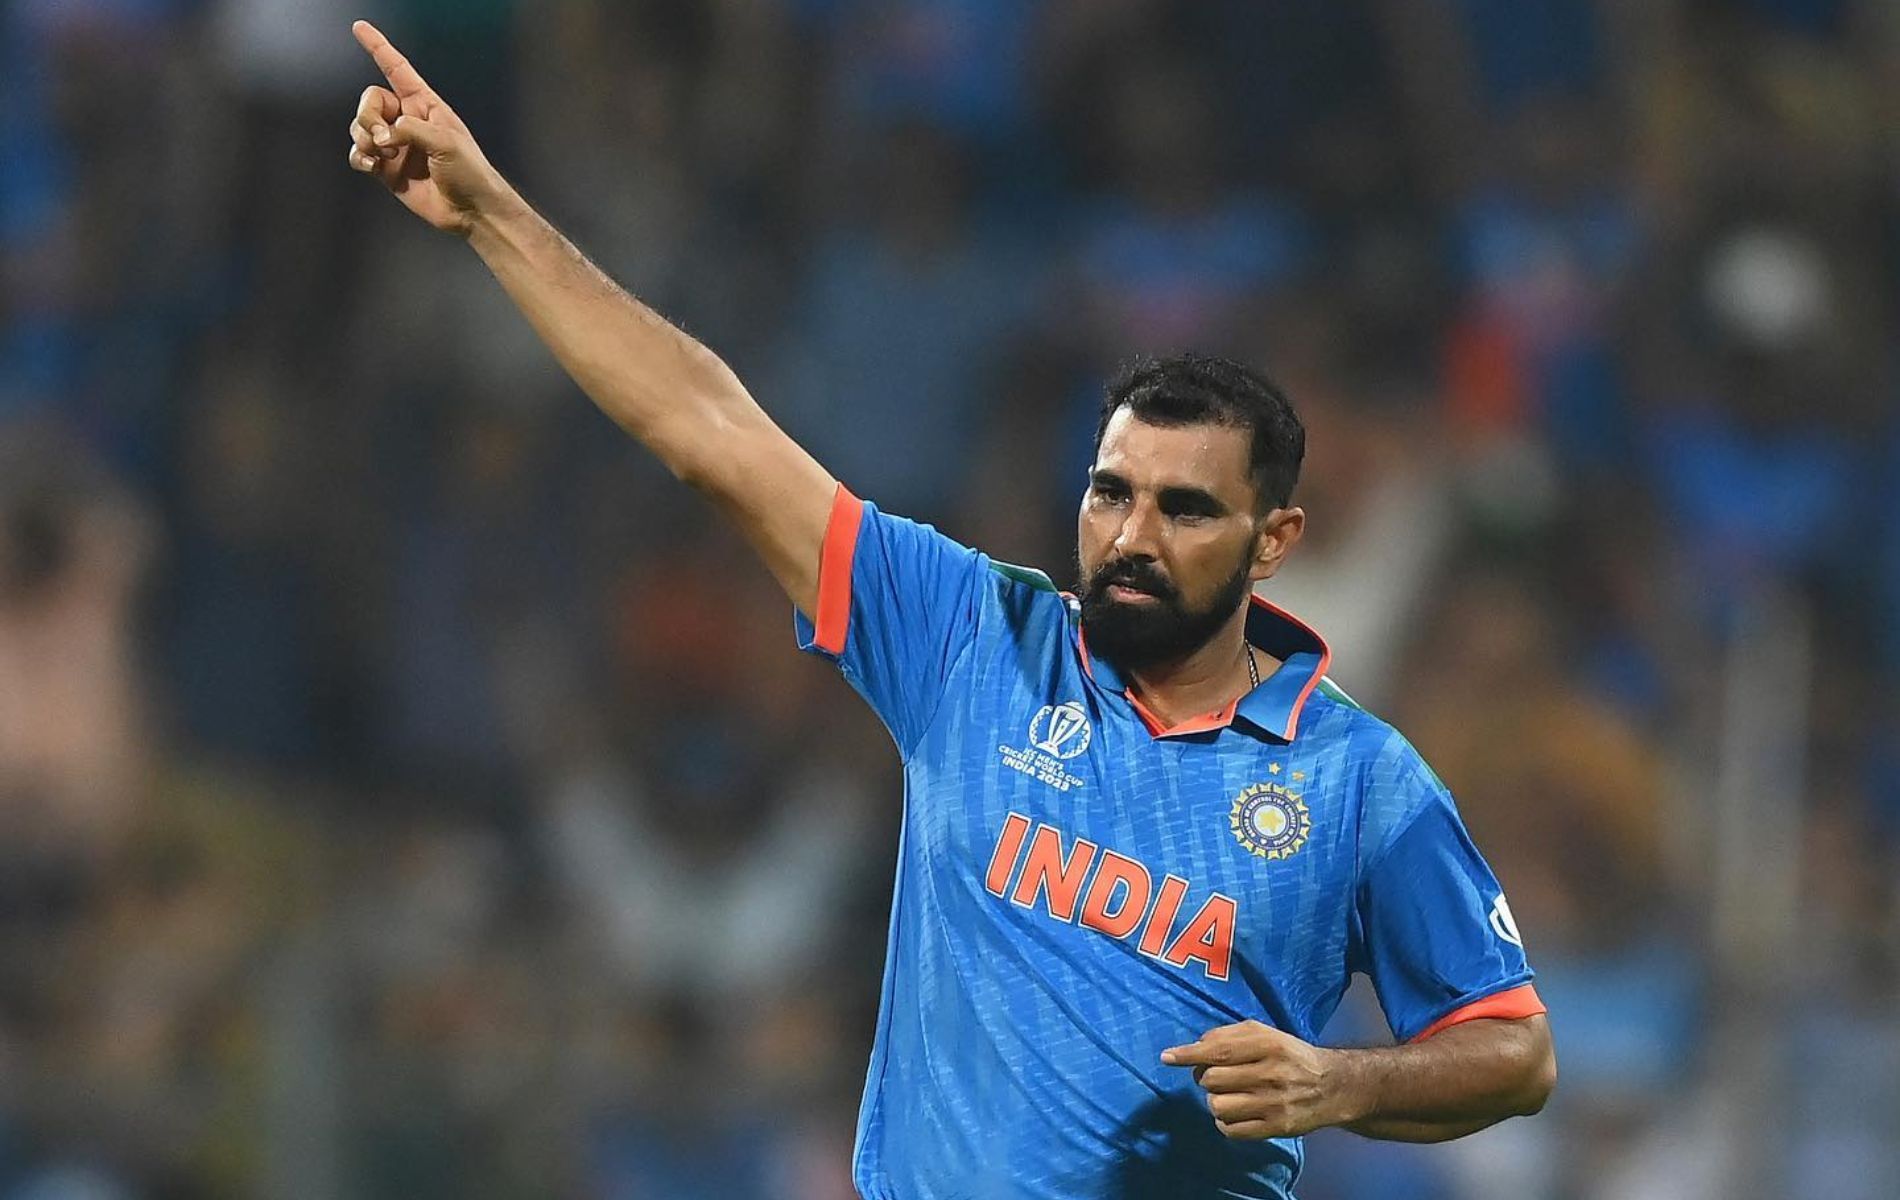 Mohammed Shami was ruled out of the South Africa Test series due to an ankle injury. (Pic: X)